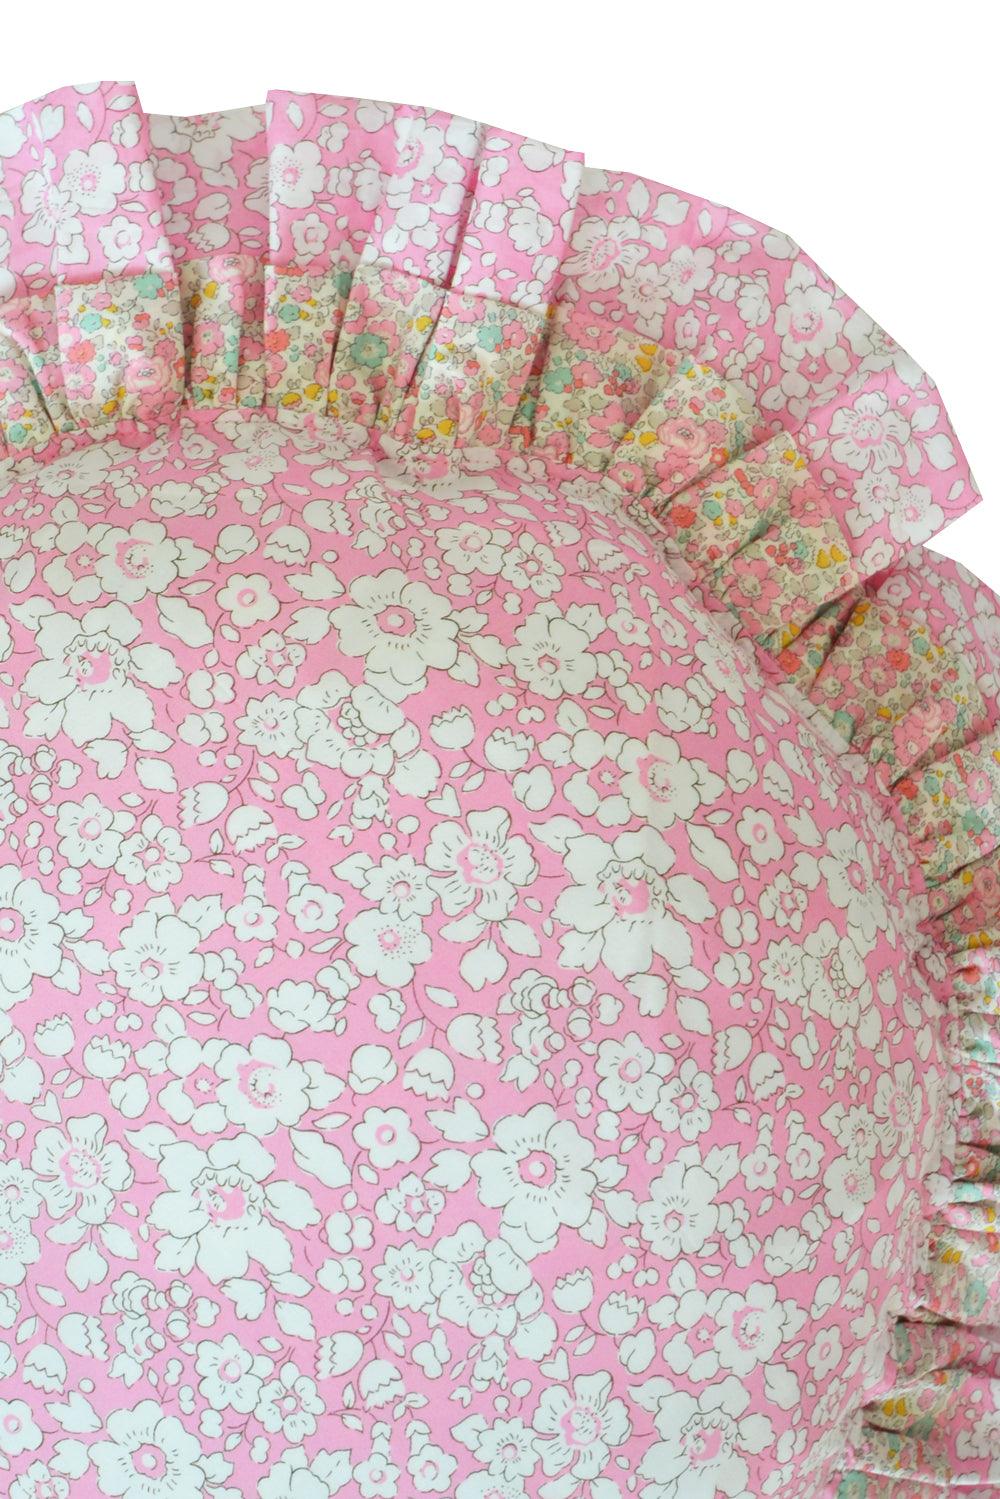 Double Ruffle Cushion made with Liberty Fabric BETSY BOO - Coco & Wolf